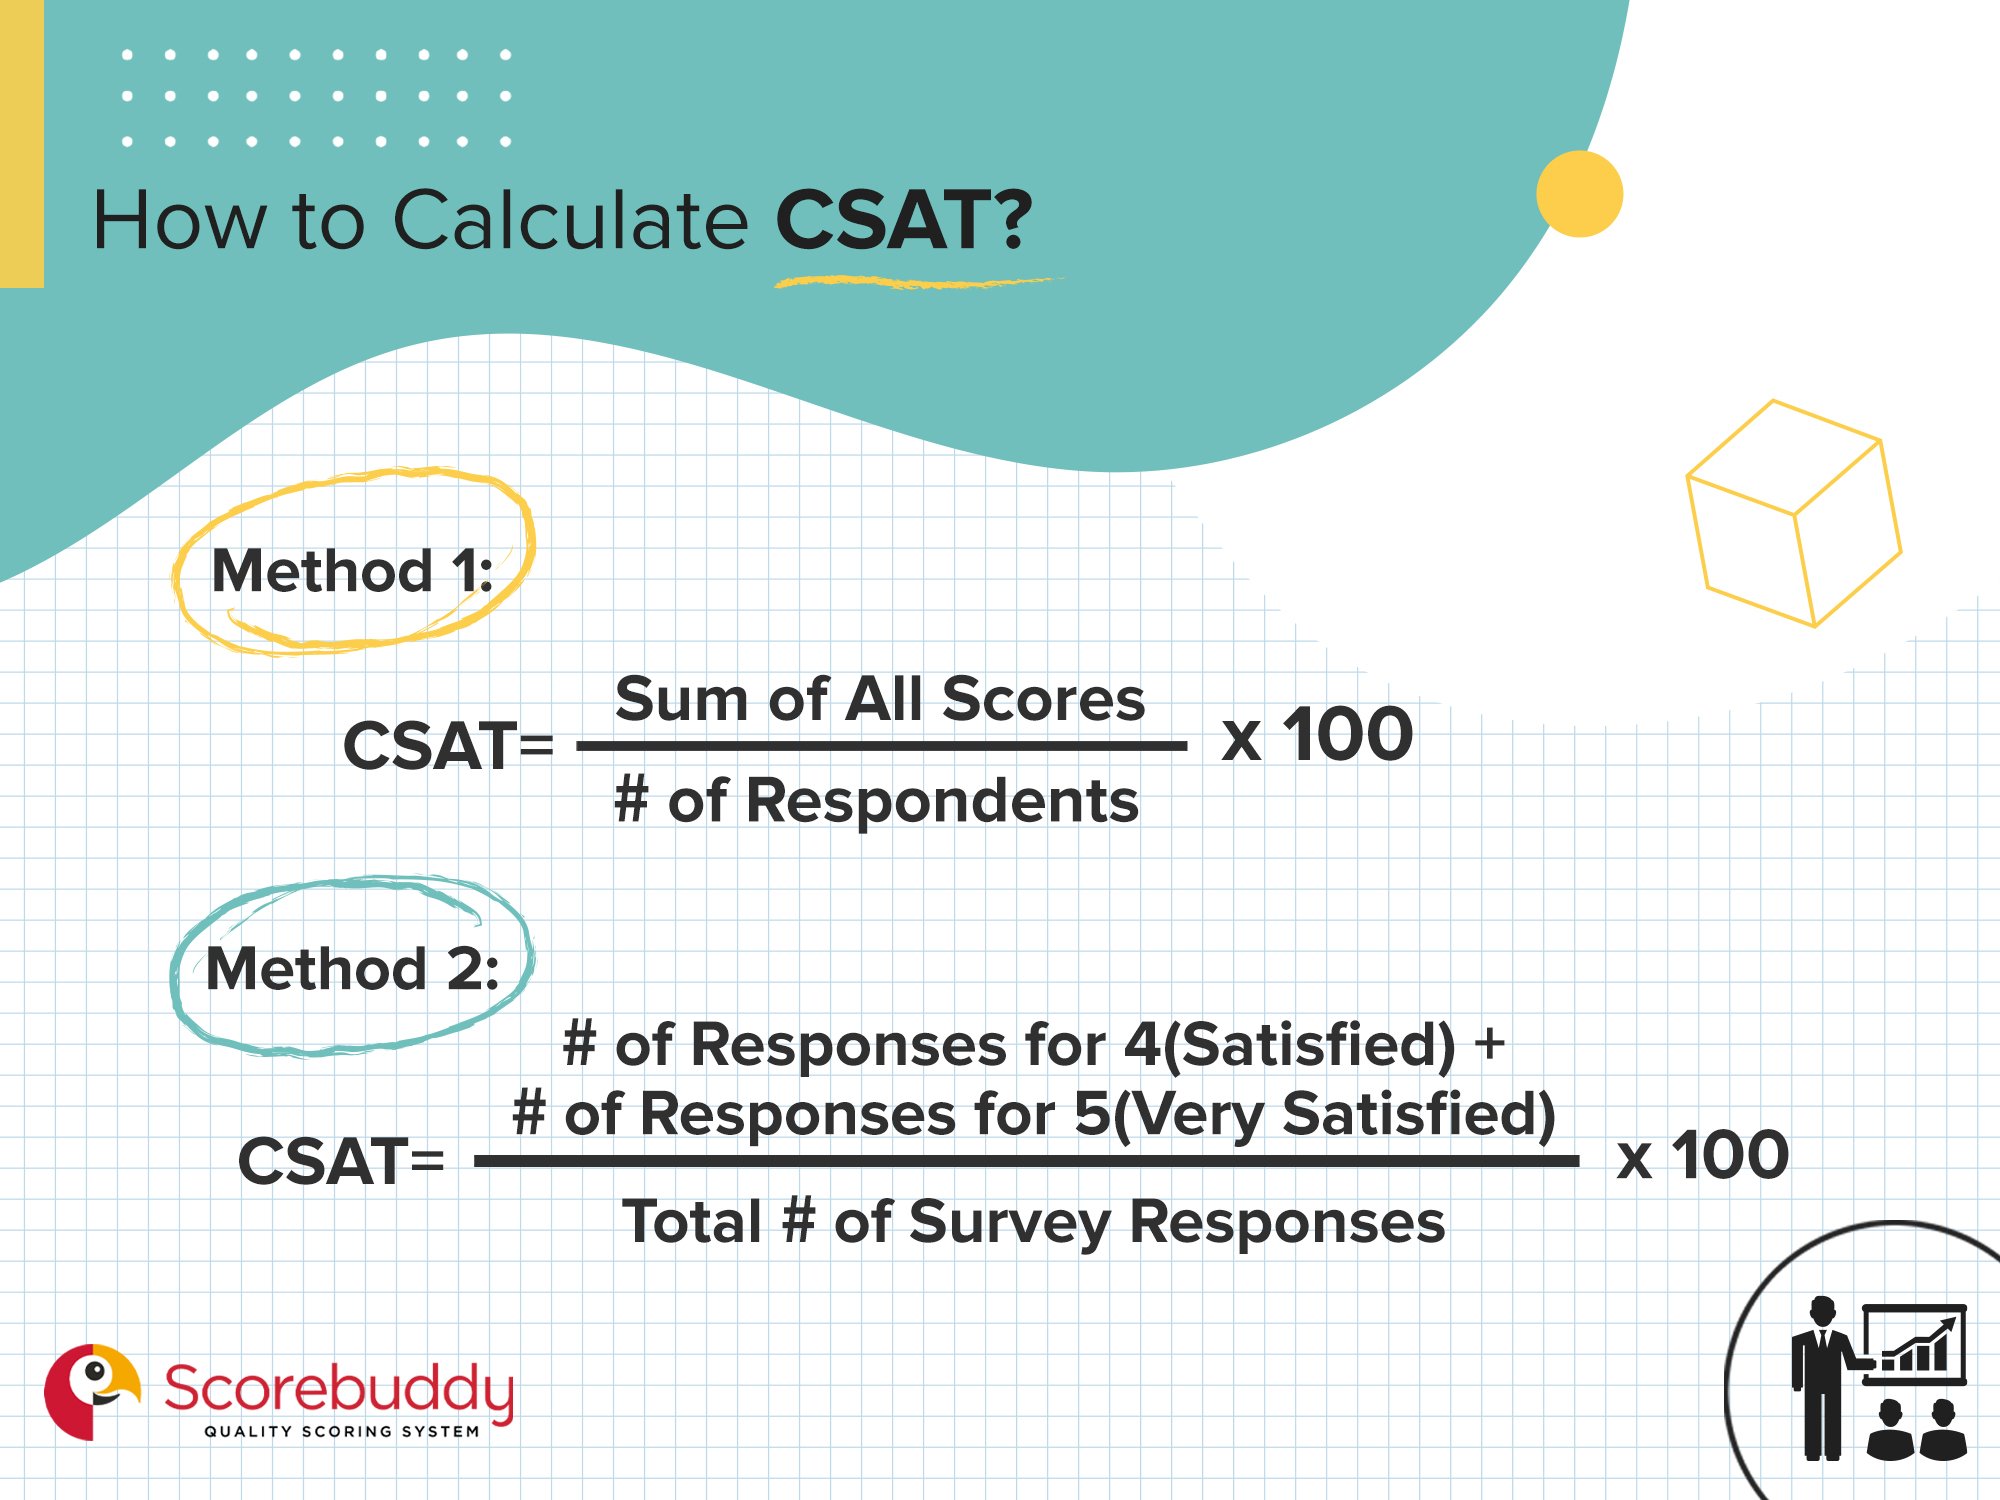 What Is a CSAT Score and How Do You Calculate It